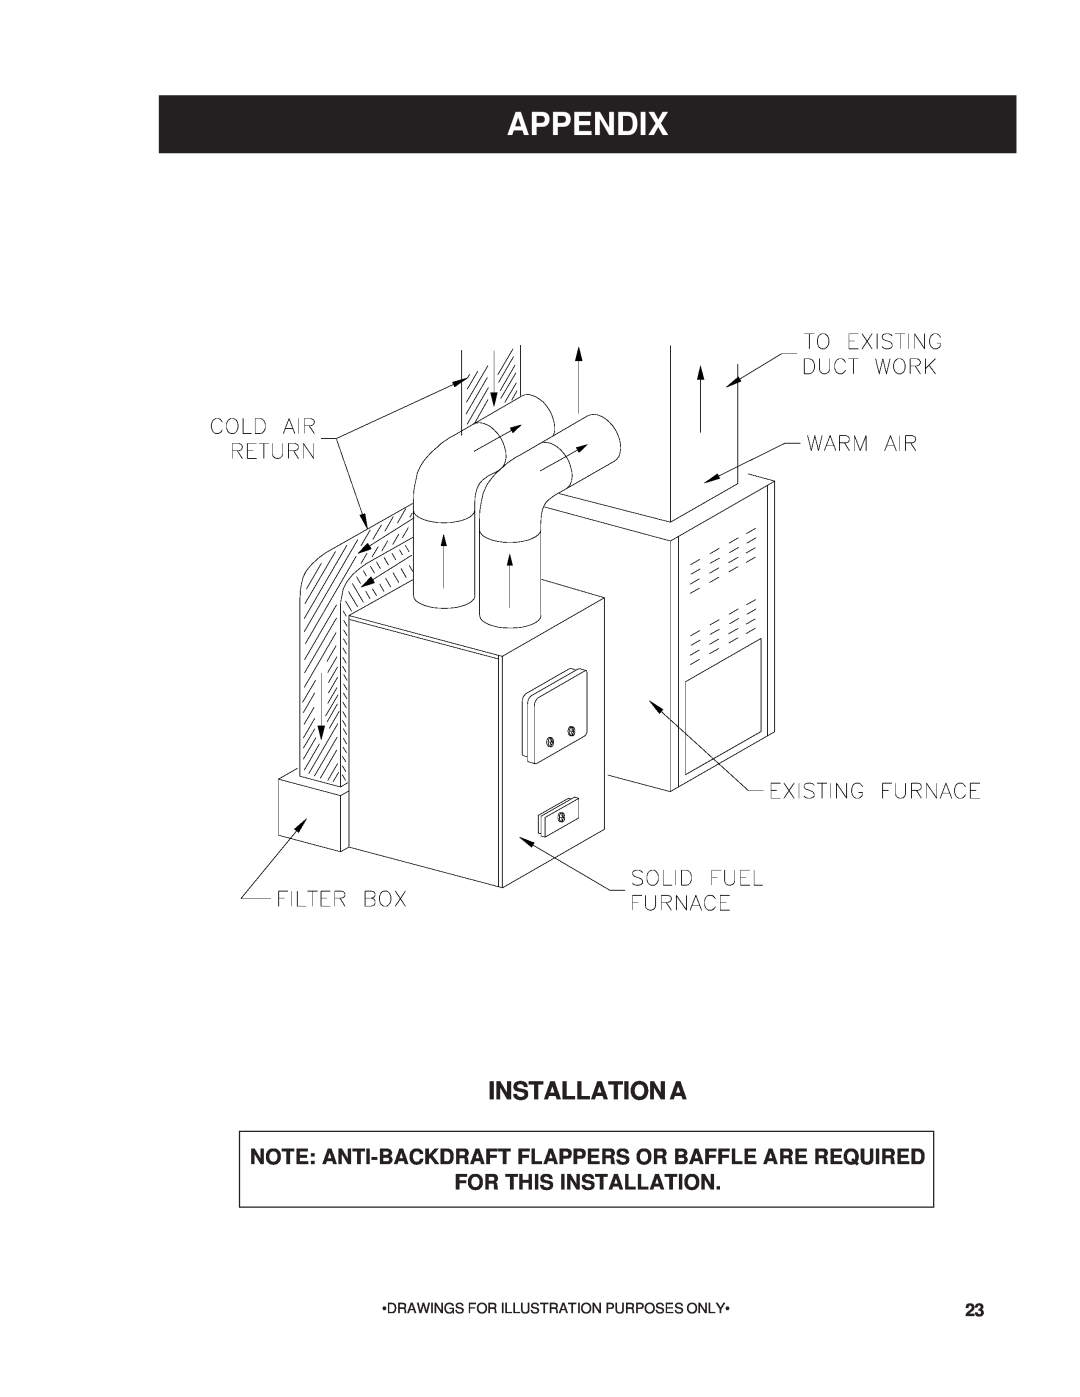 United States Stove 22AF owner manual Appendix, Installation A, Drawings For Illustration Purposes Only 